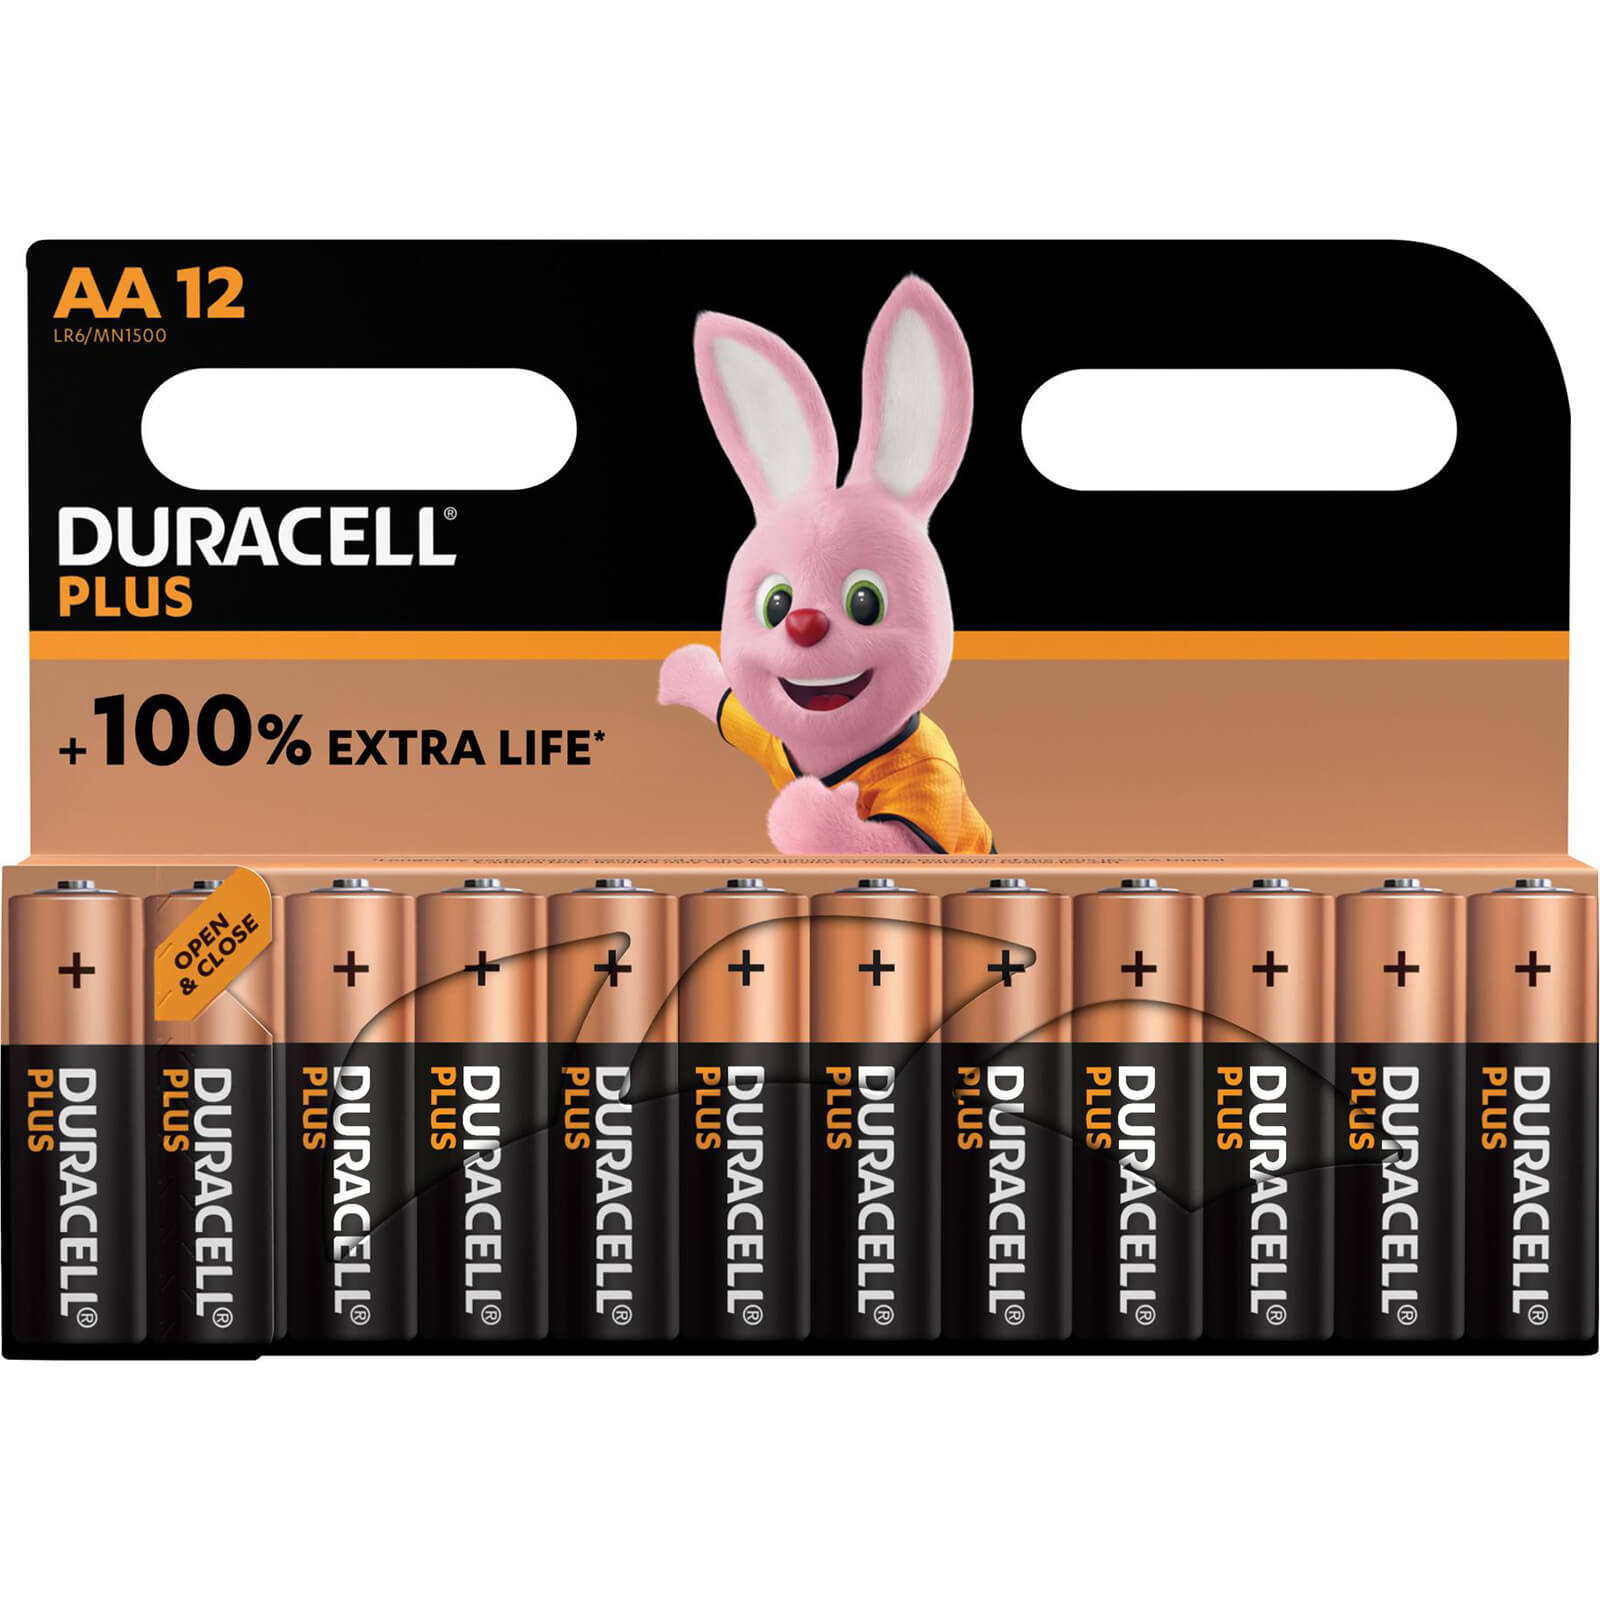 Duracell AA Cell Plus Power 100% Batteries Pack of 12